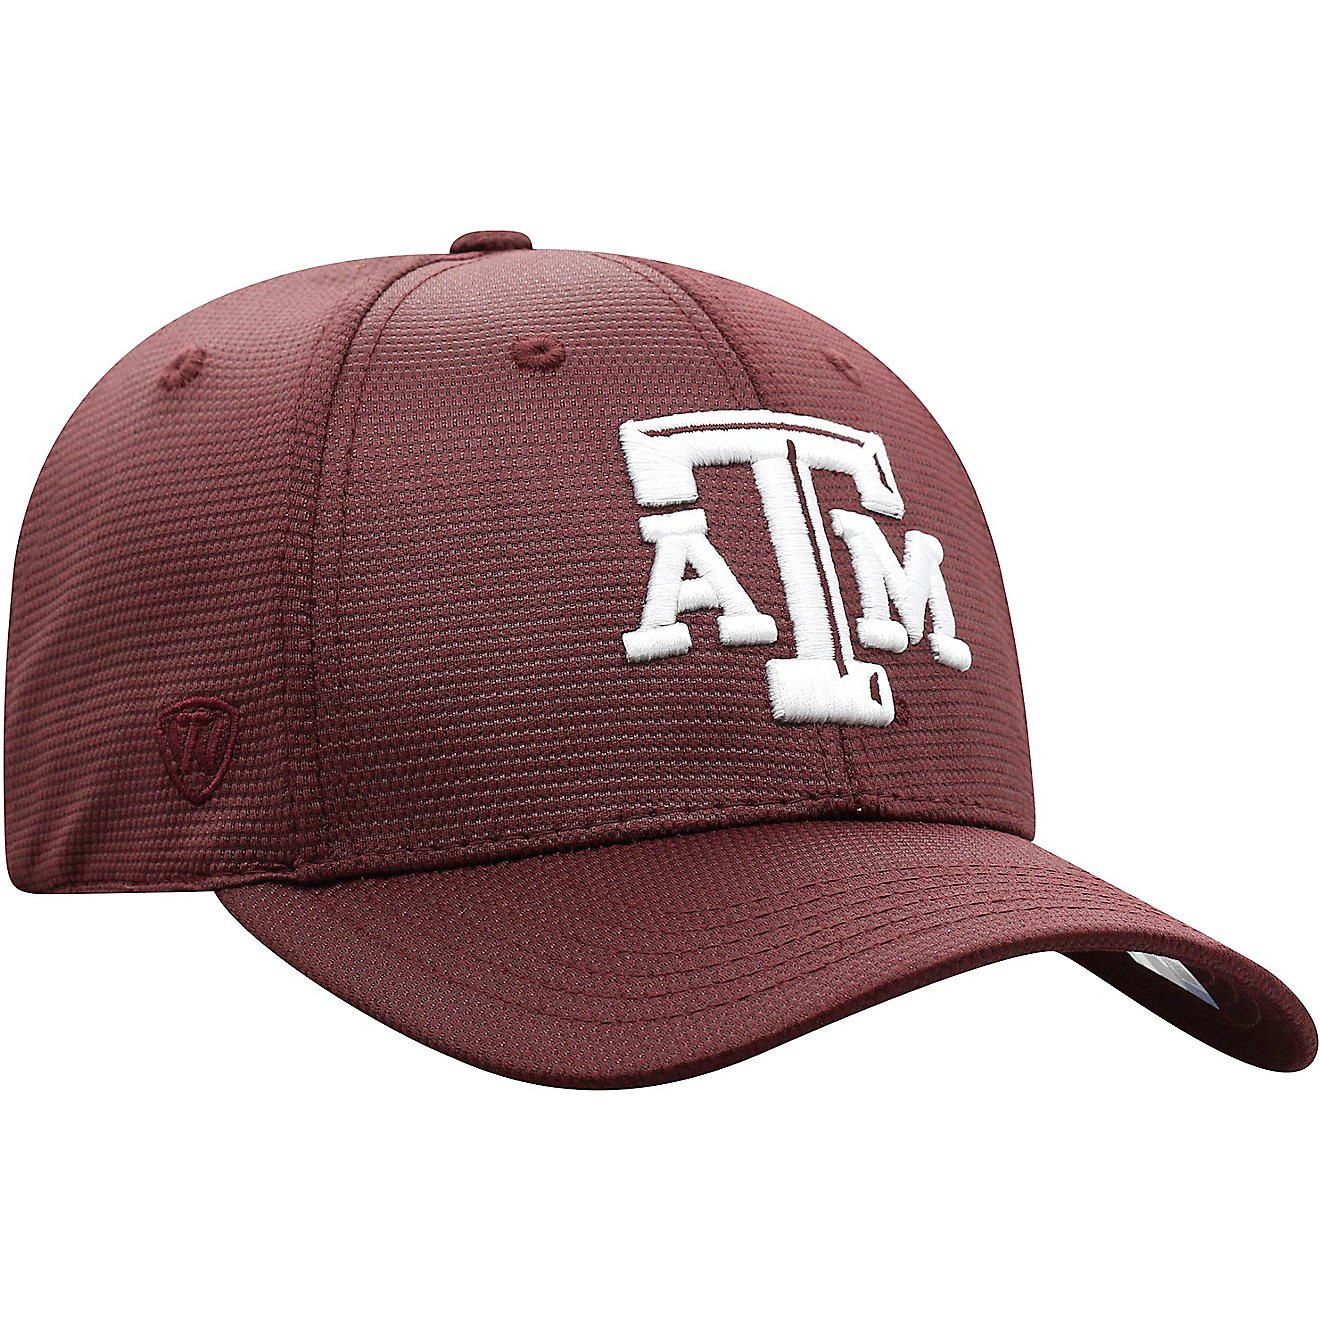 Top of the World Men's Texas A&M University Progo Cap                                                                            - view number 3